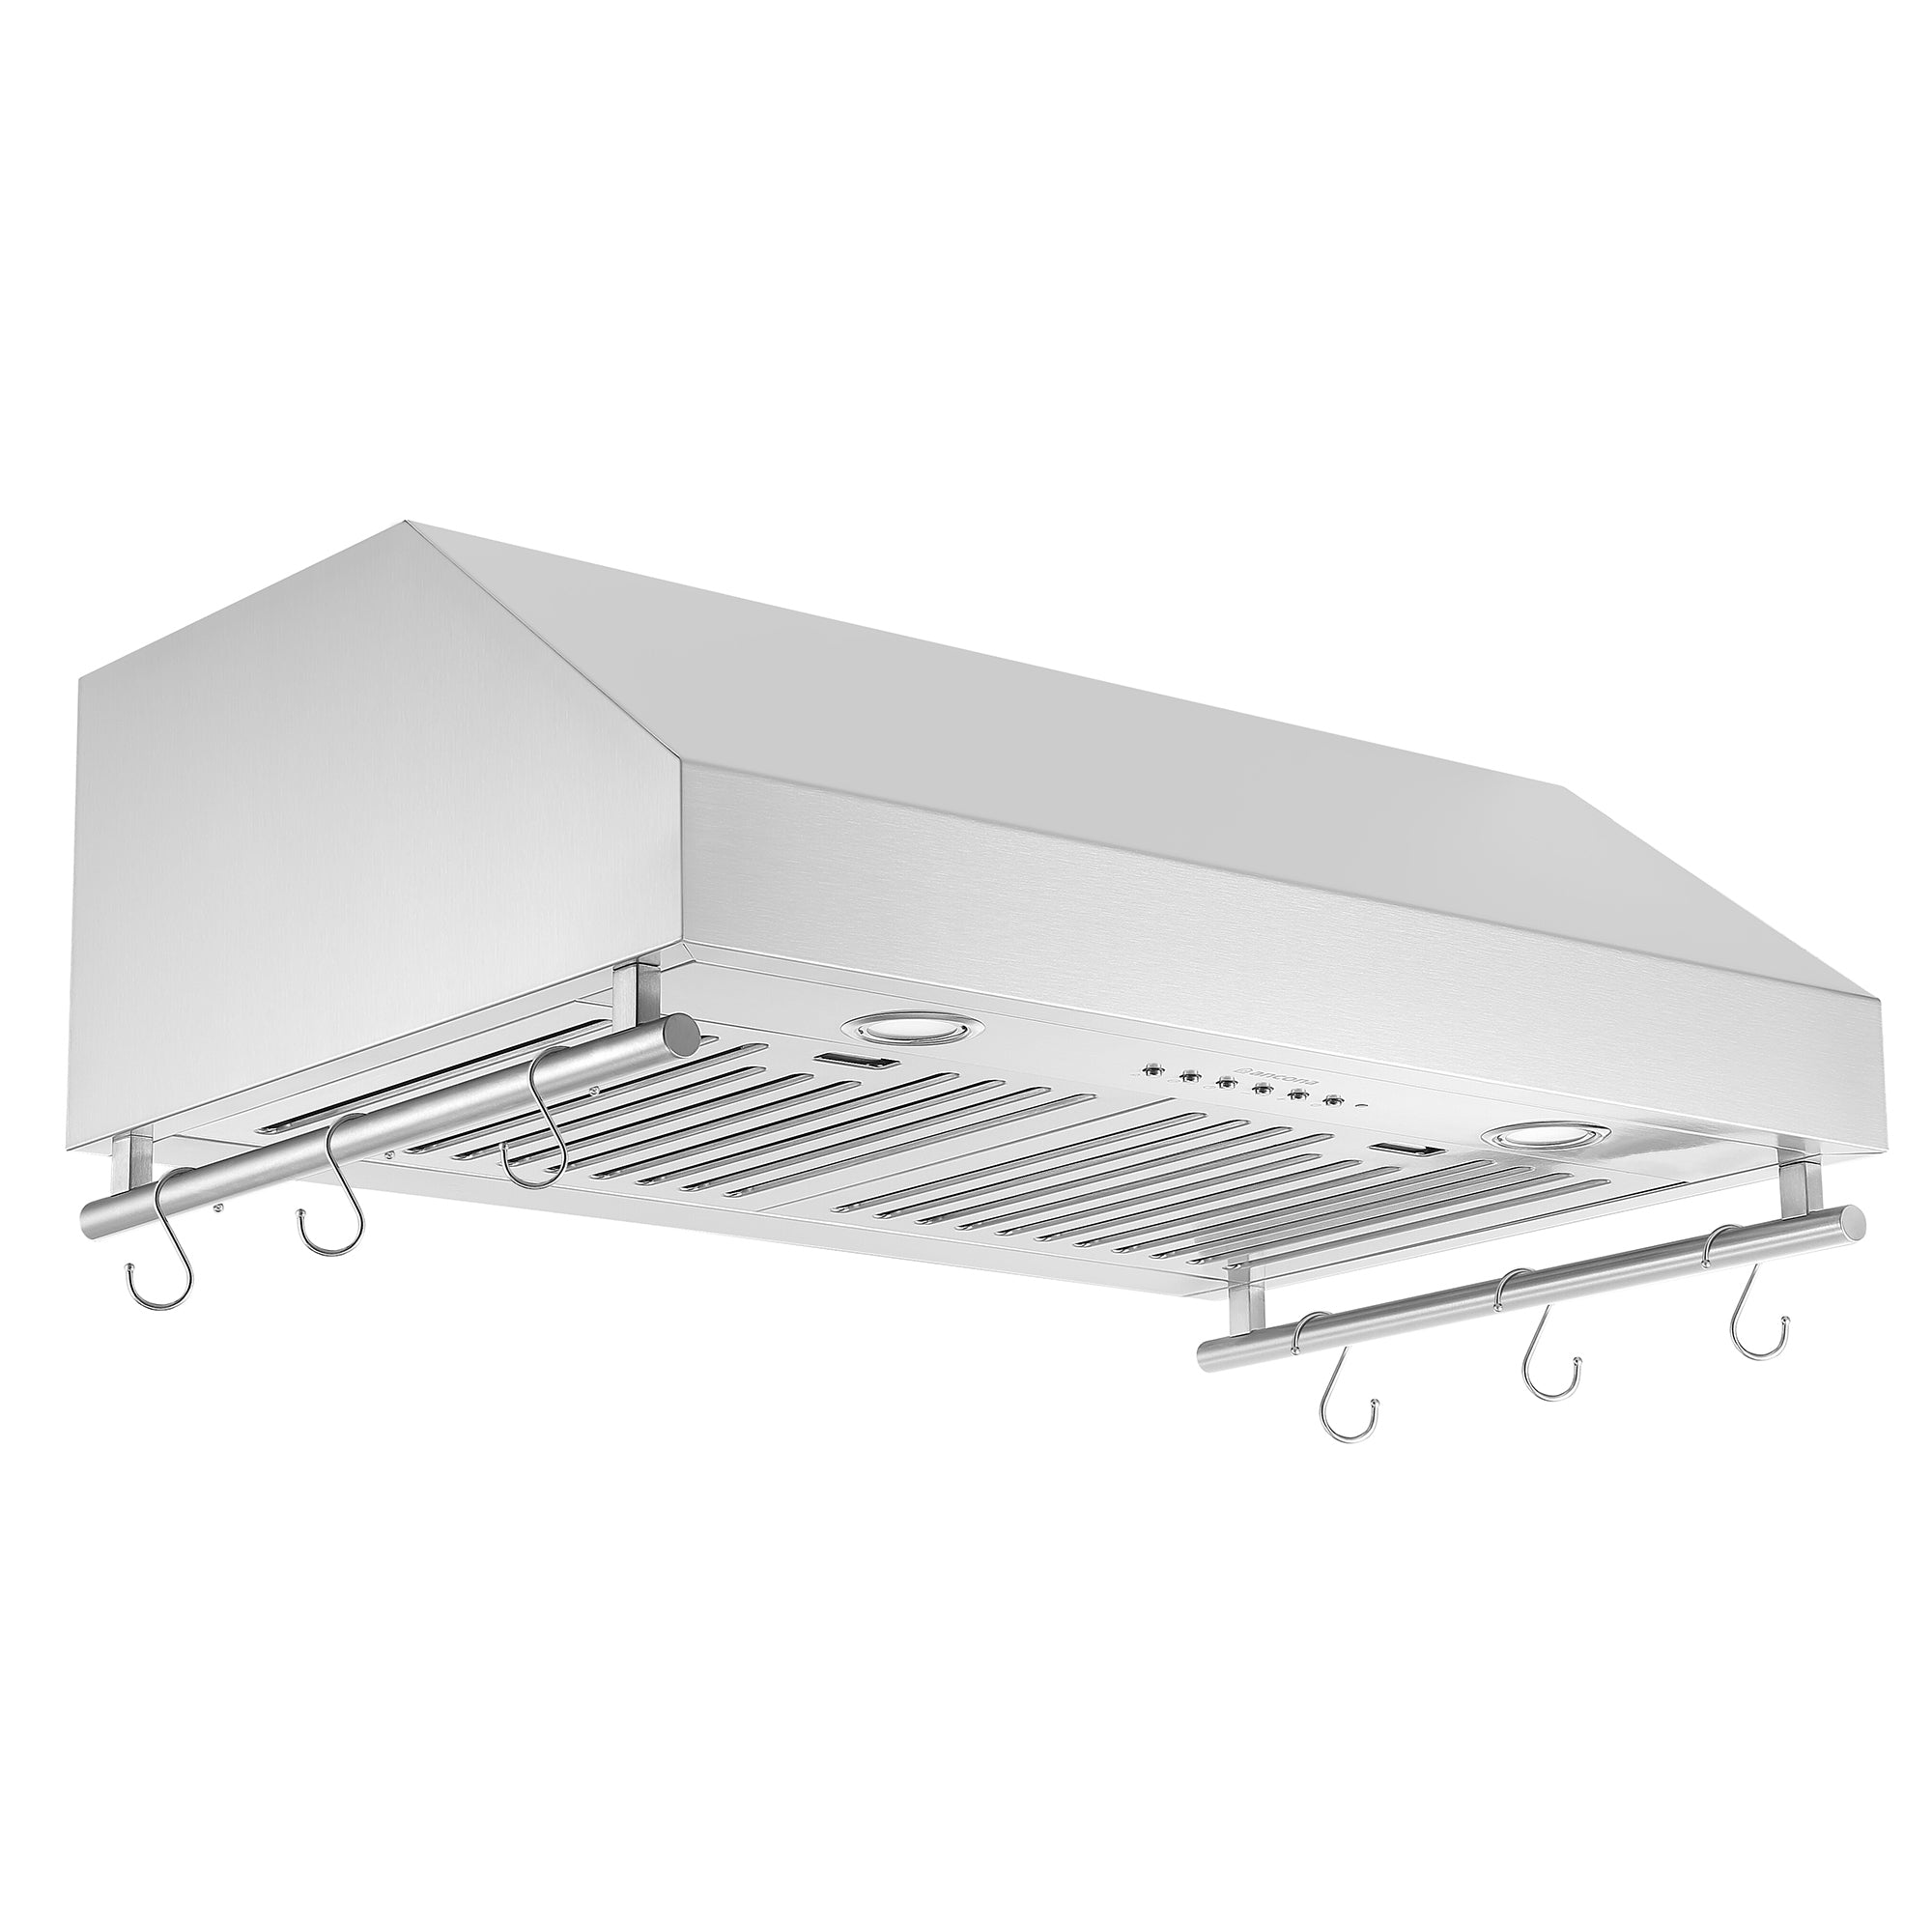 Ancona 30” 450 CFM Under Cabinet Range Hood with Auto Night Light and Utensil Bars in Stainless Steel